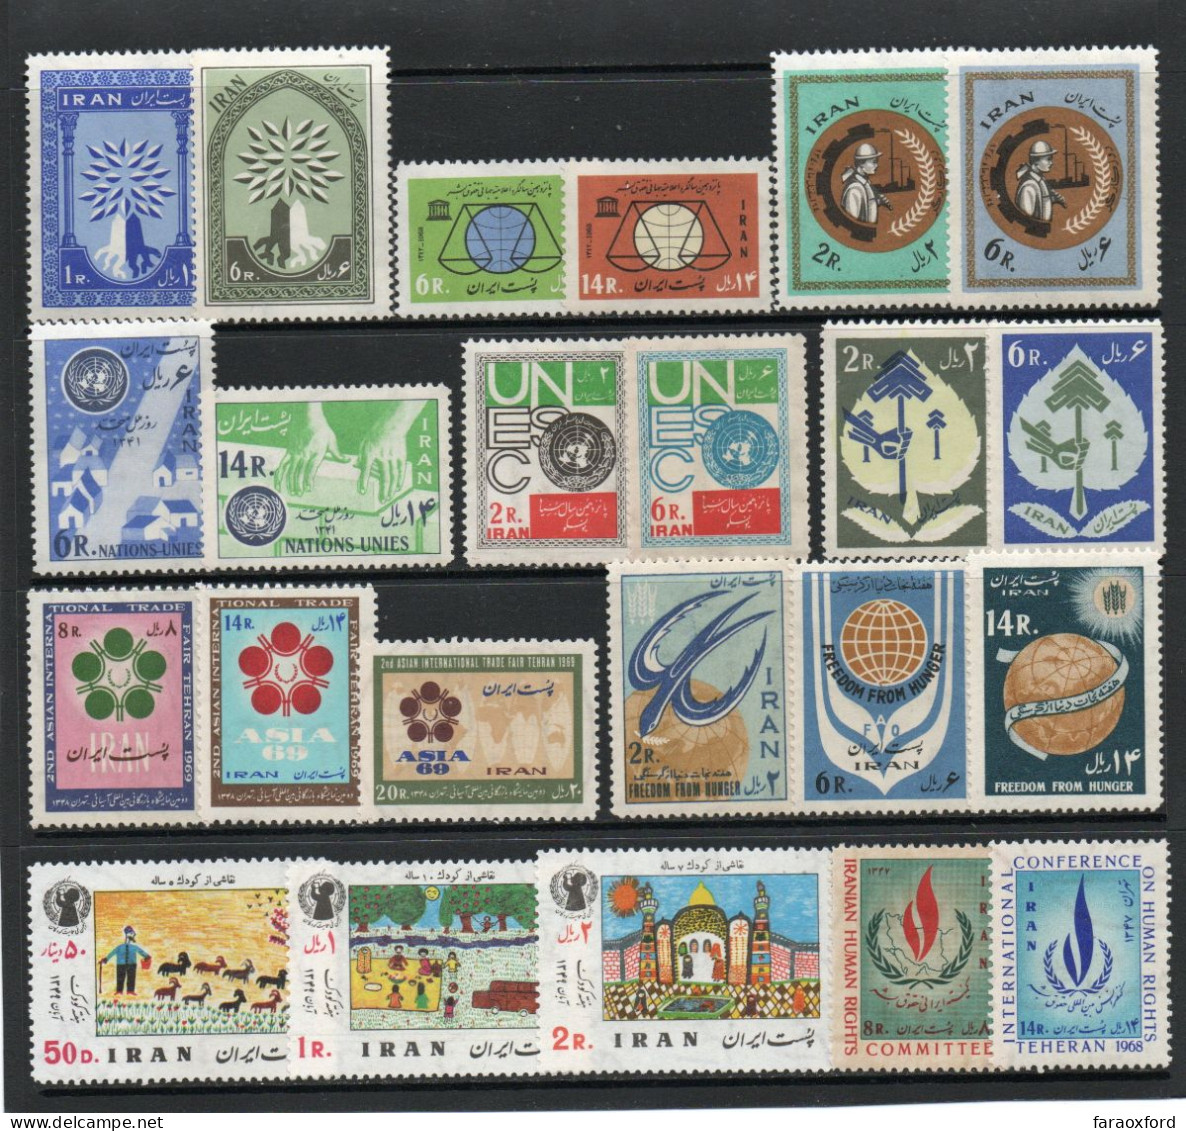 IRAN - ايران - PERSIA - 1960 To 1970 - COLLECTION OF 10 COMPLETE SETS OF STAMPS - MINT NOT HINGED - LOT 5 - Irán